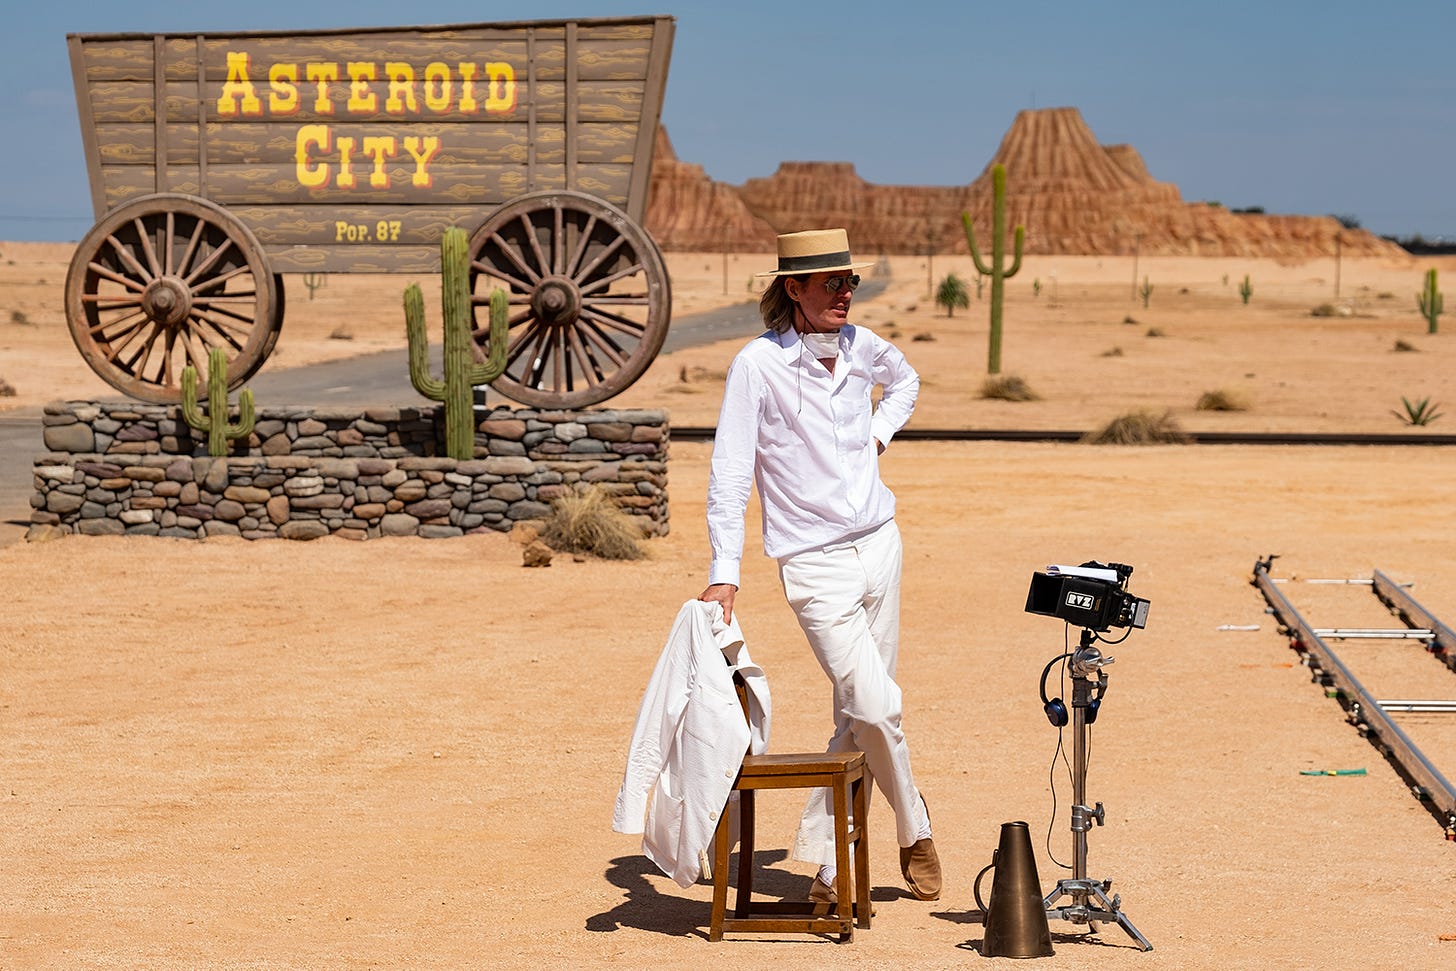 Wes Anderson on Asteroid City